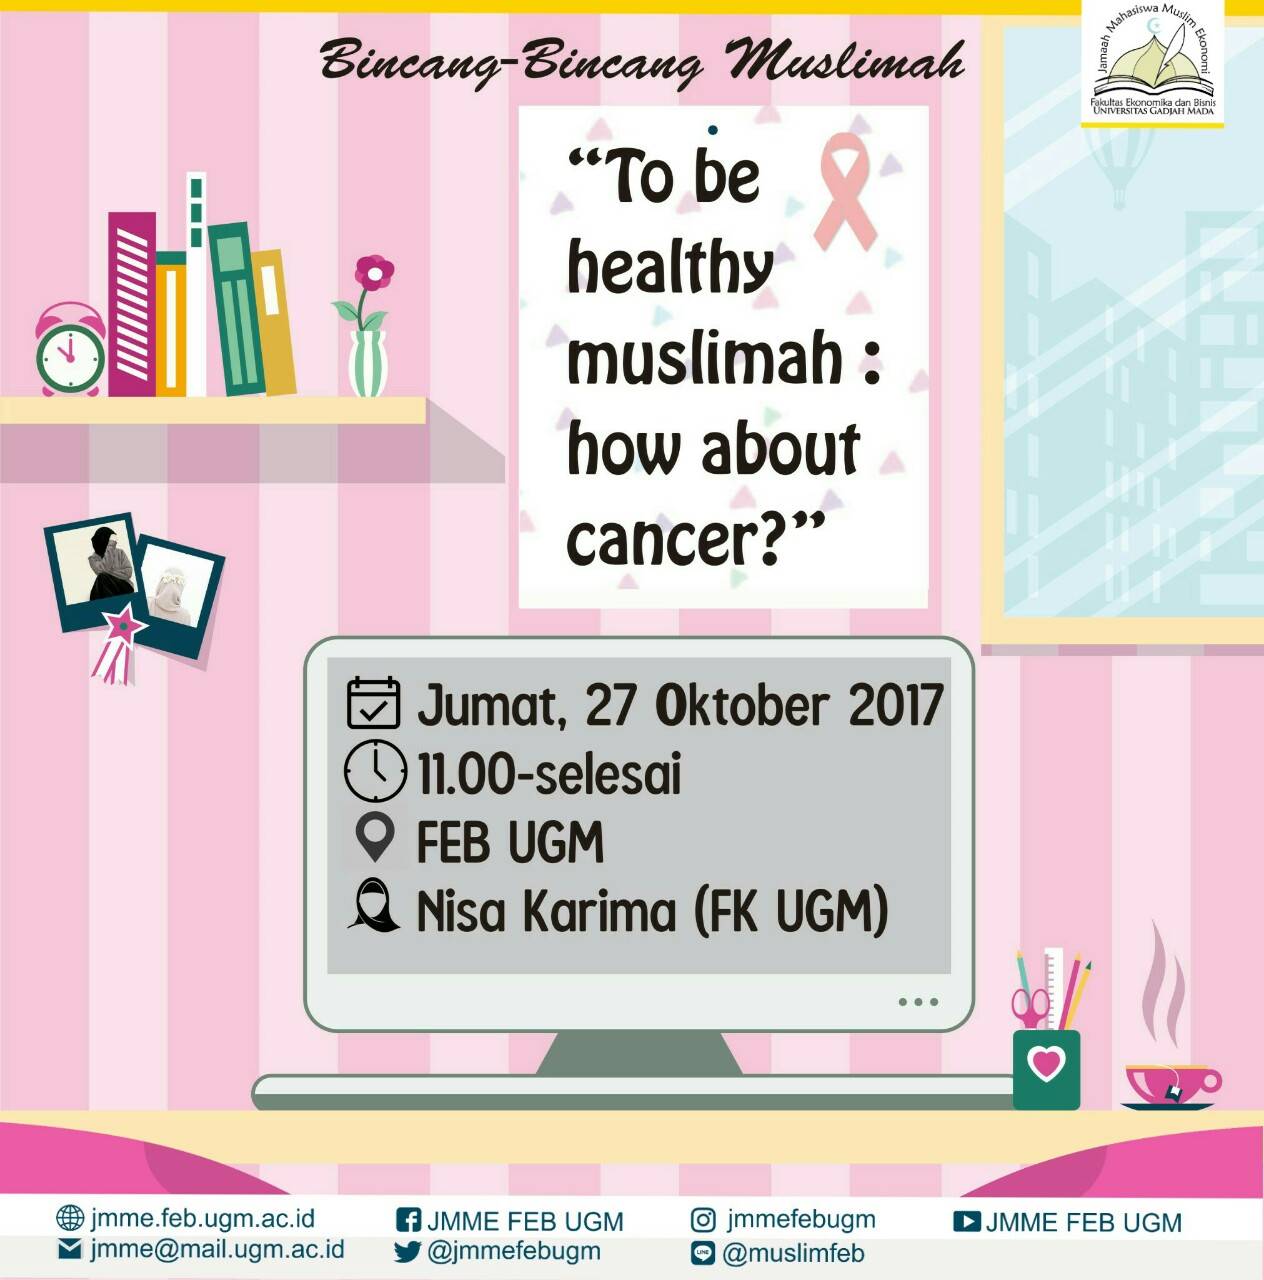 To be healthy muslimah